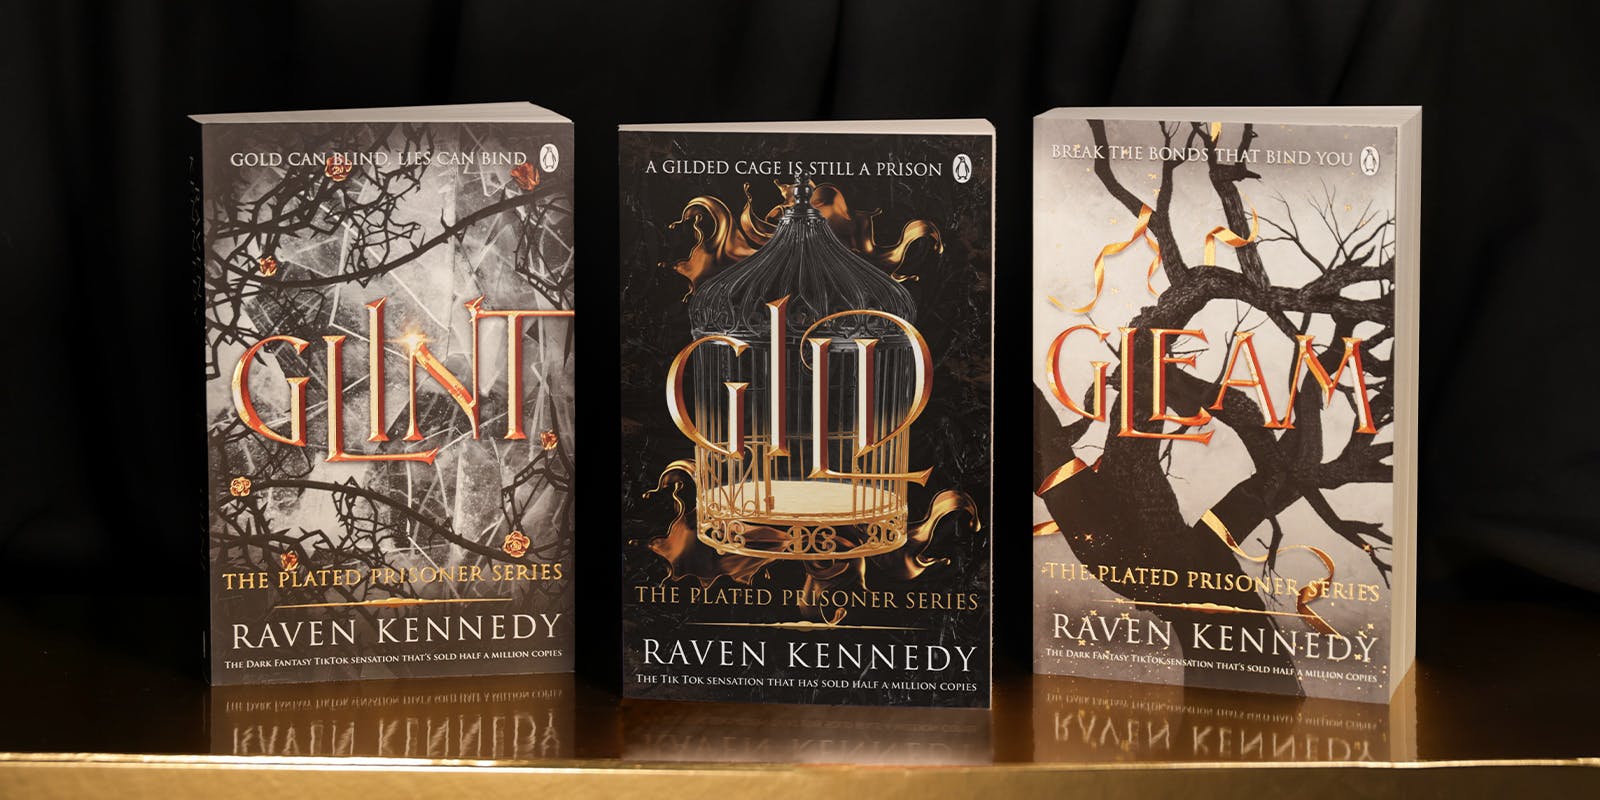 11 fun facts about Gild by Raven Kennedy